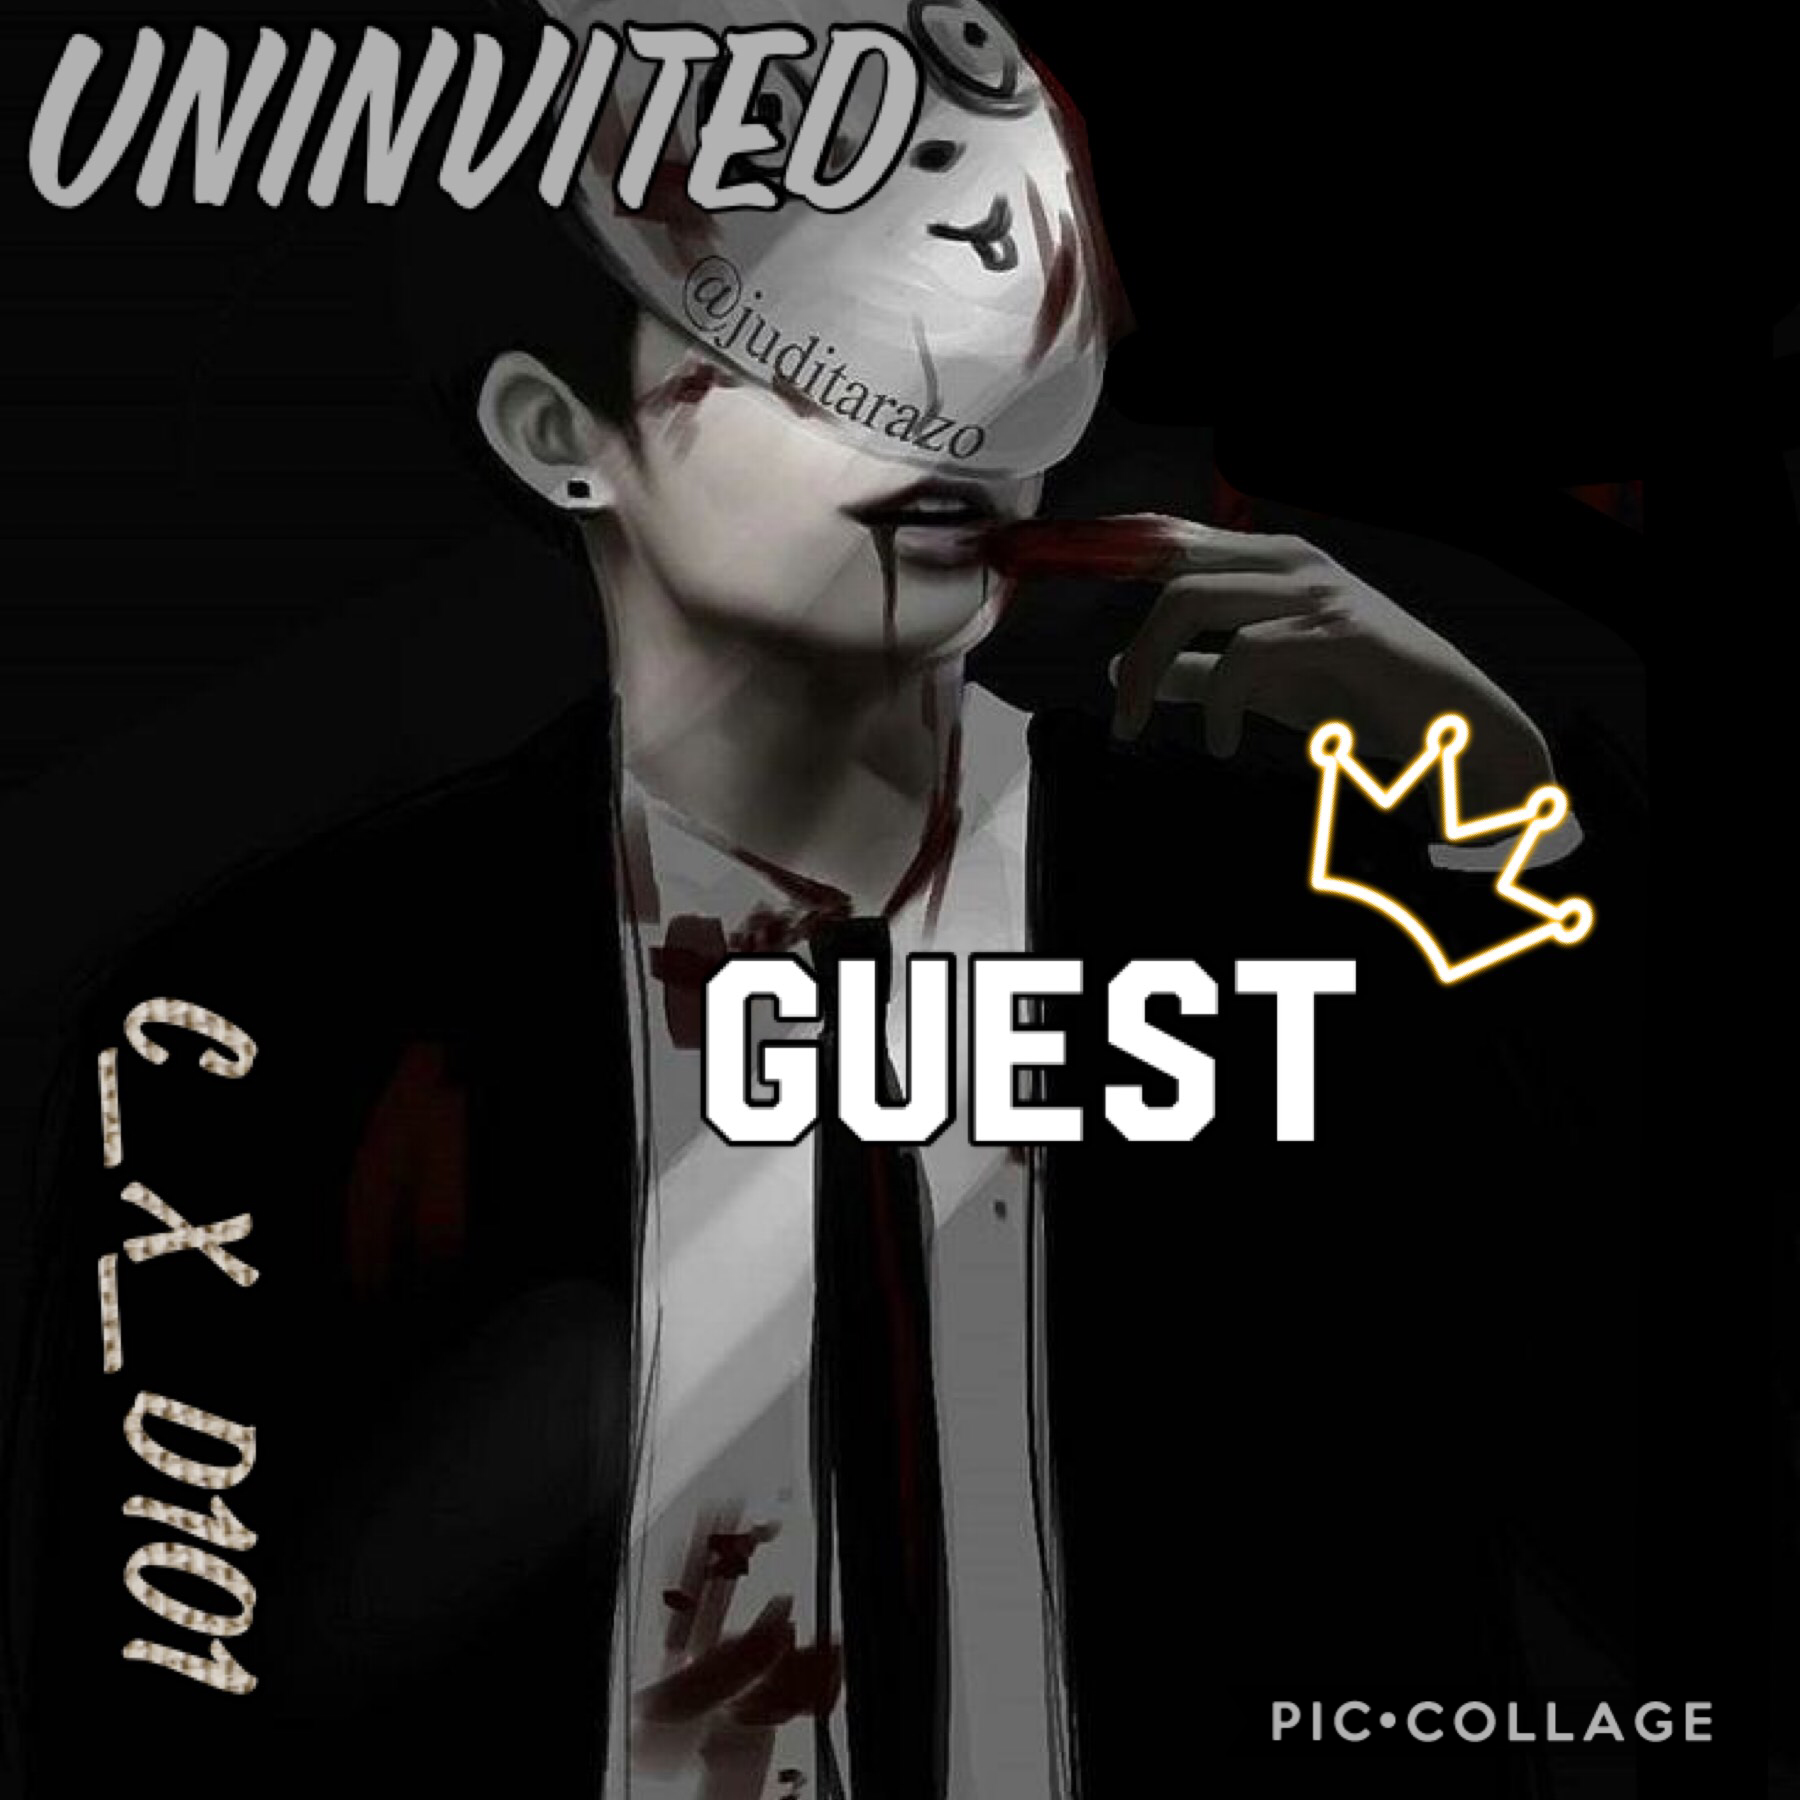 go read the first chapter of my book “uninvited guest” on wattpad @c_x_d101